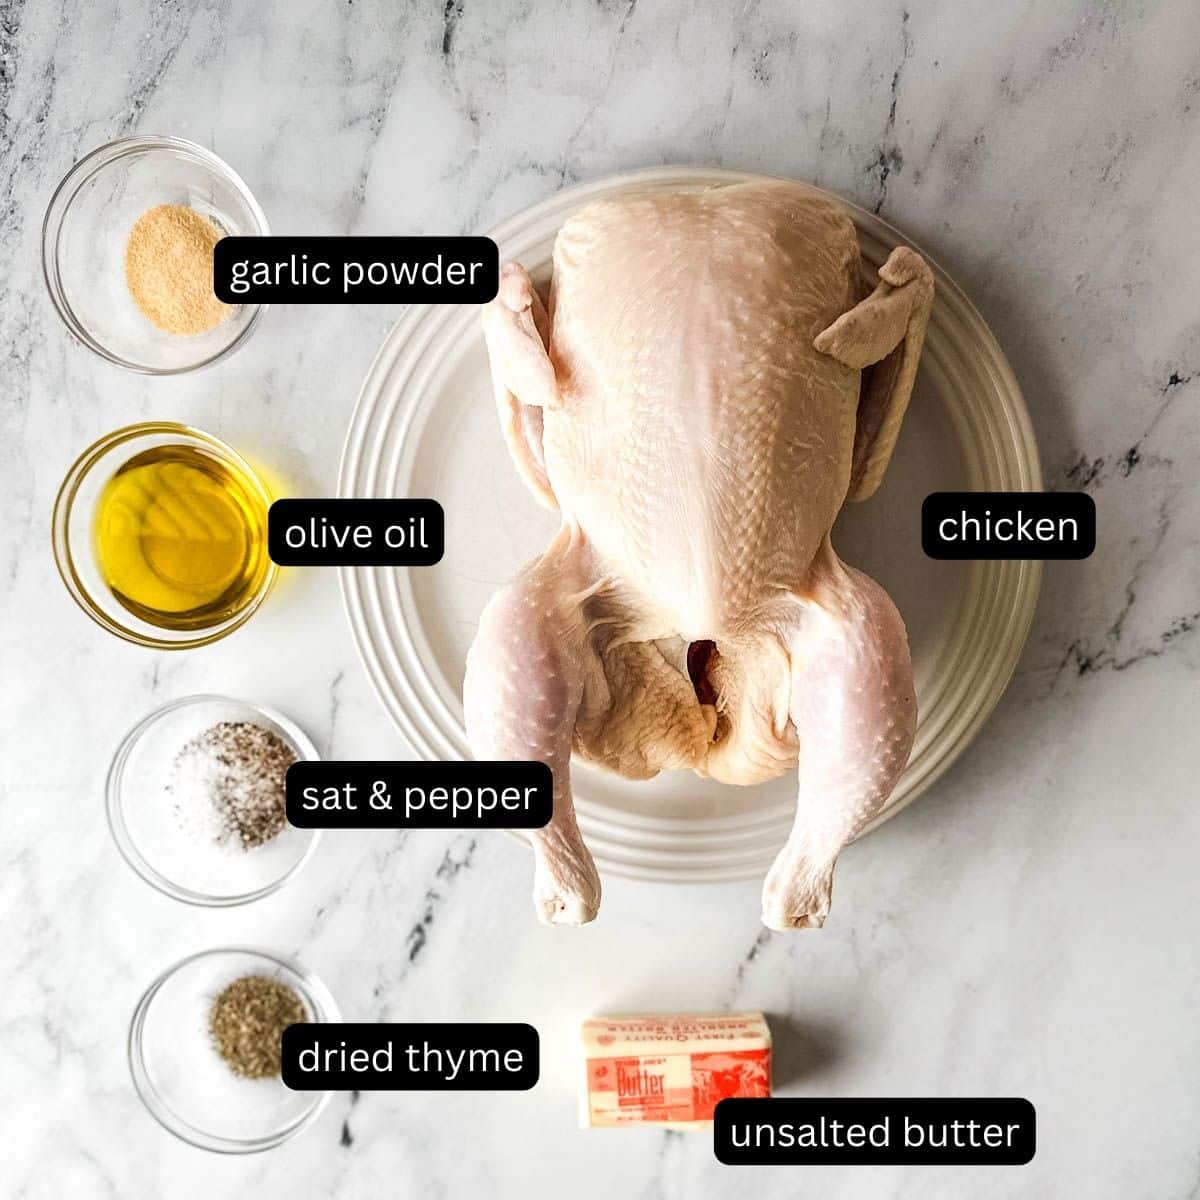 The labeled ingredients for roasted half chicken on a white marble counter.